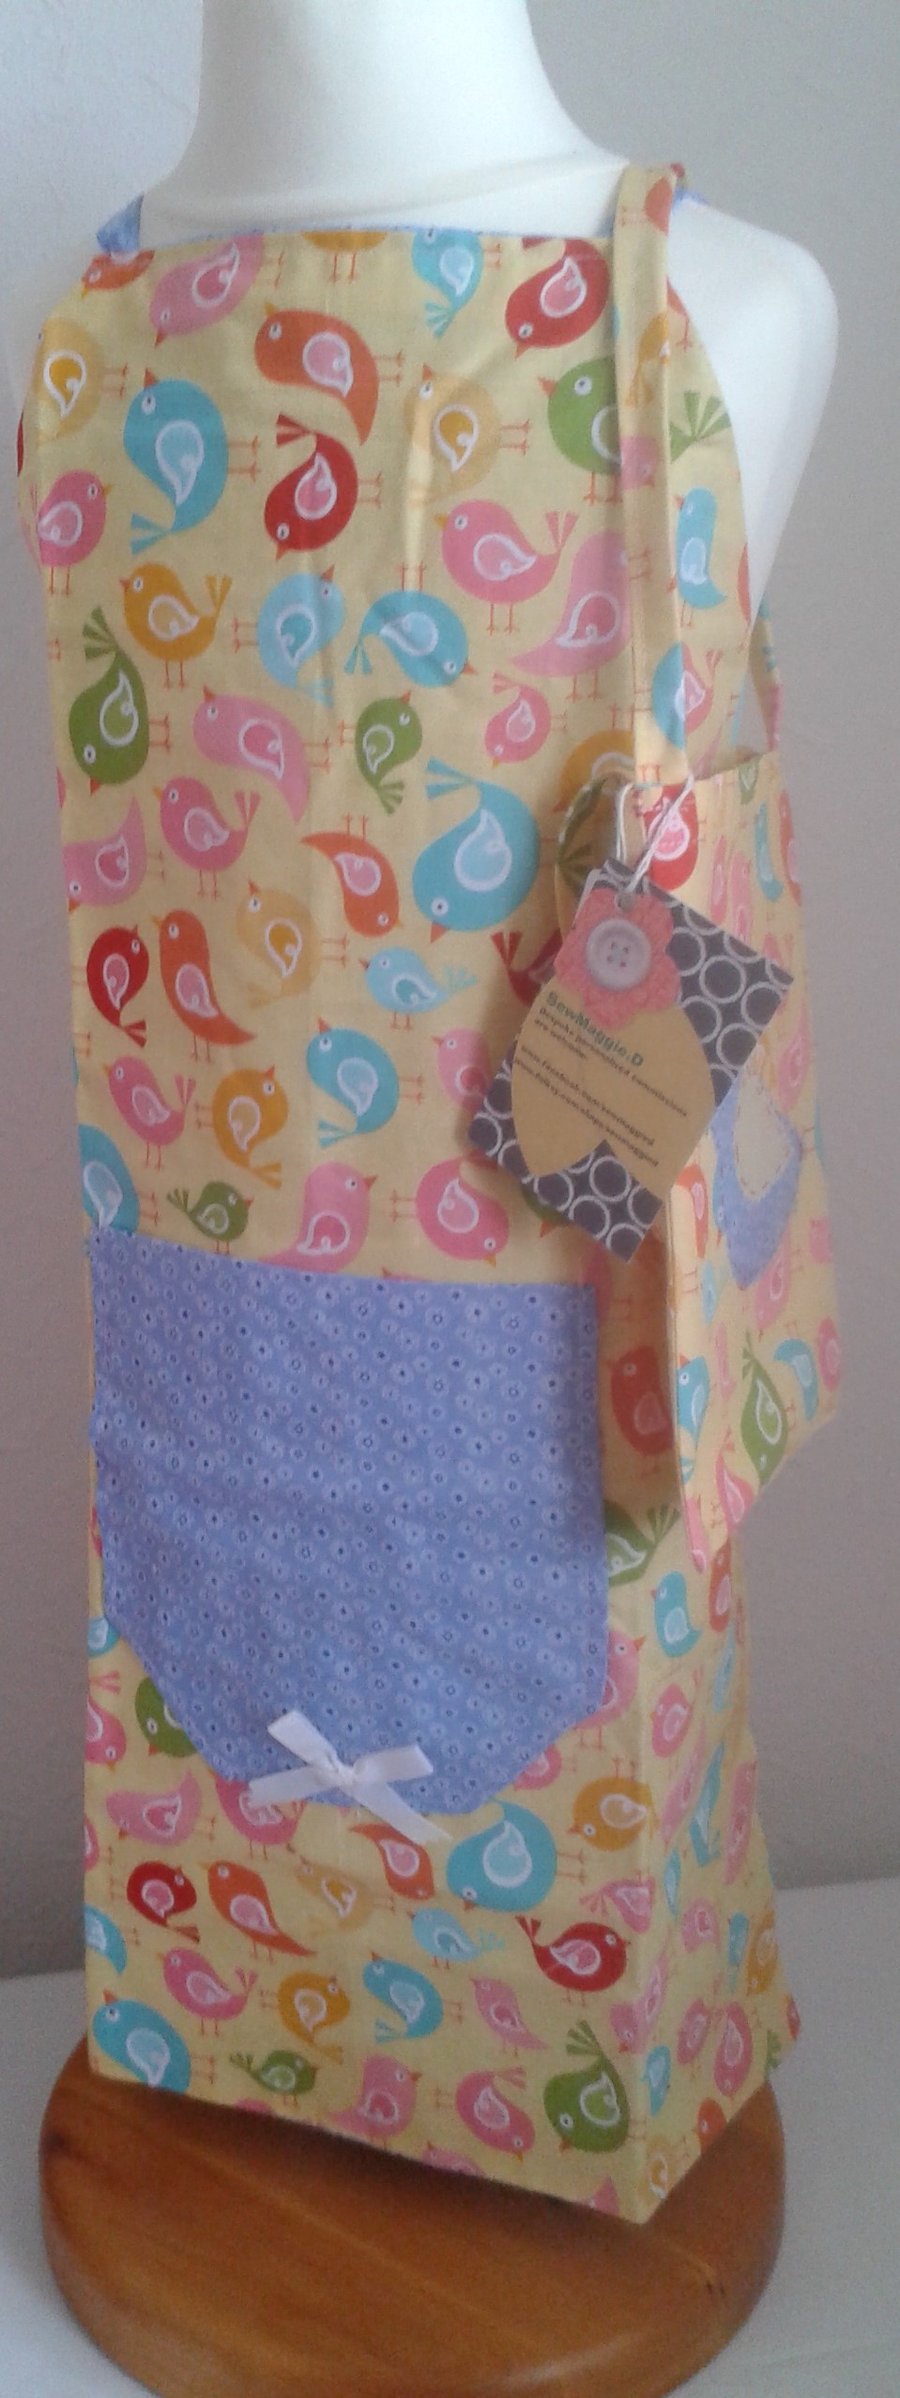 CHILDS REVERSABLE APRON WITH MATCHING CARRY BAG.  HELLO SUNSHINE BIRDS